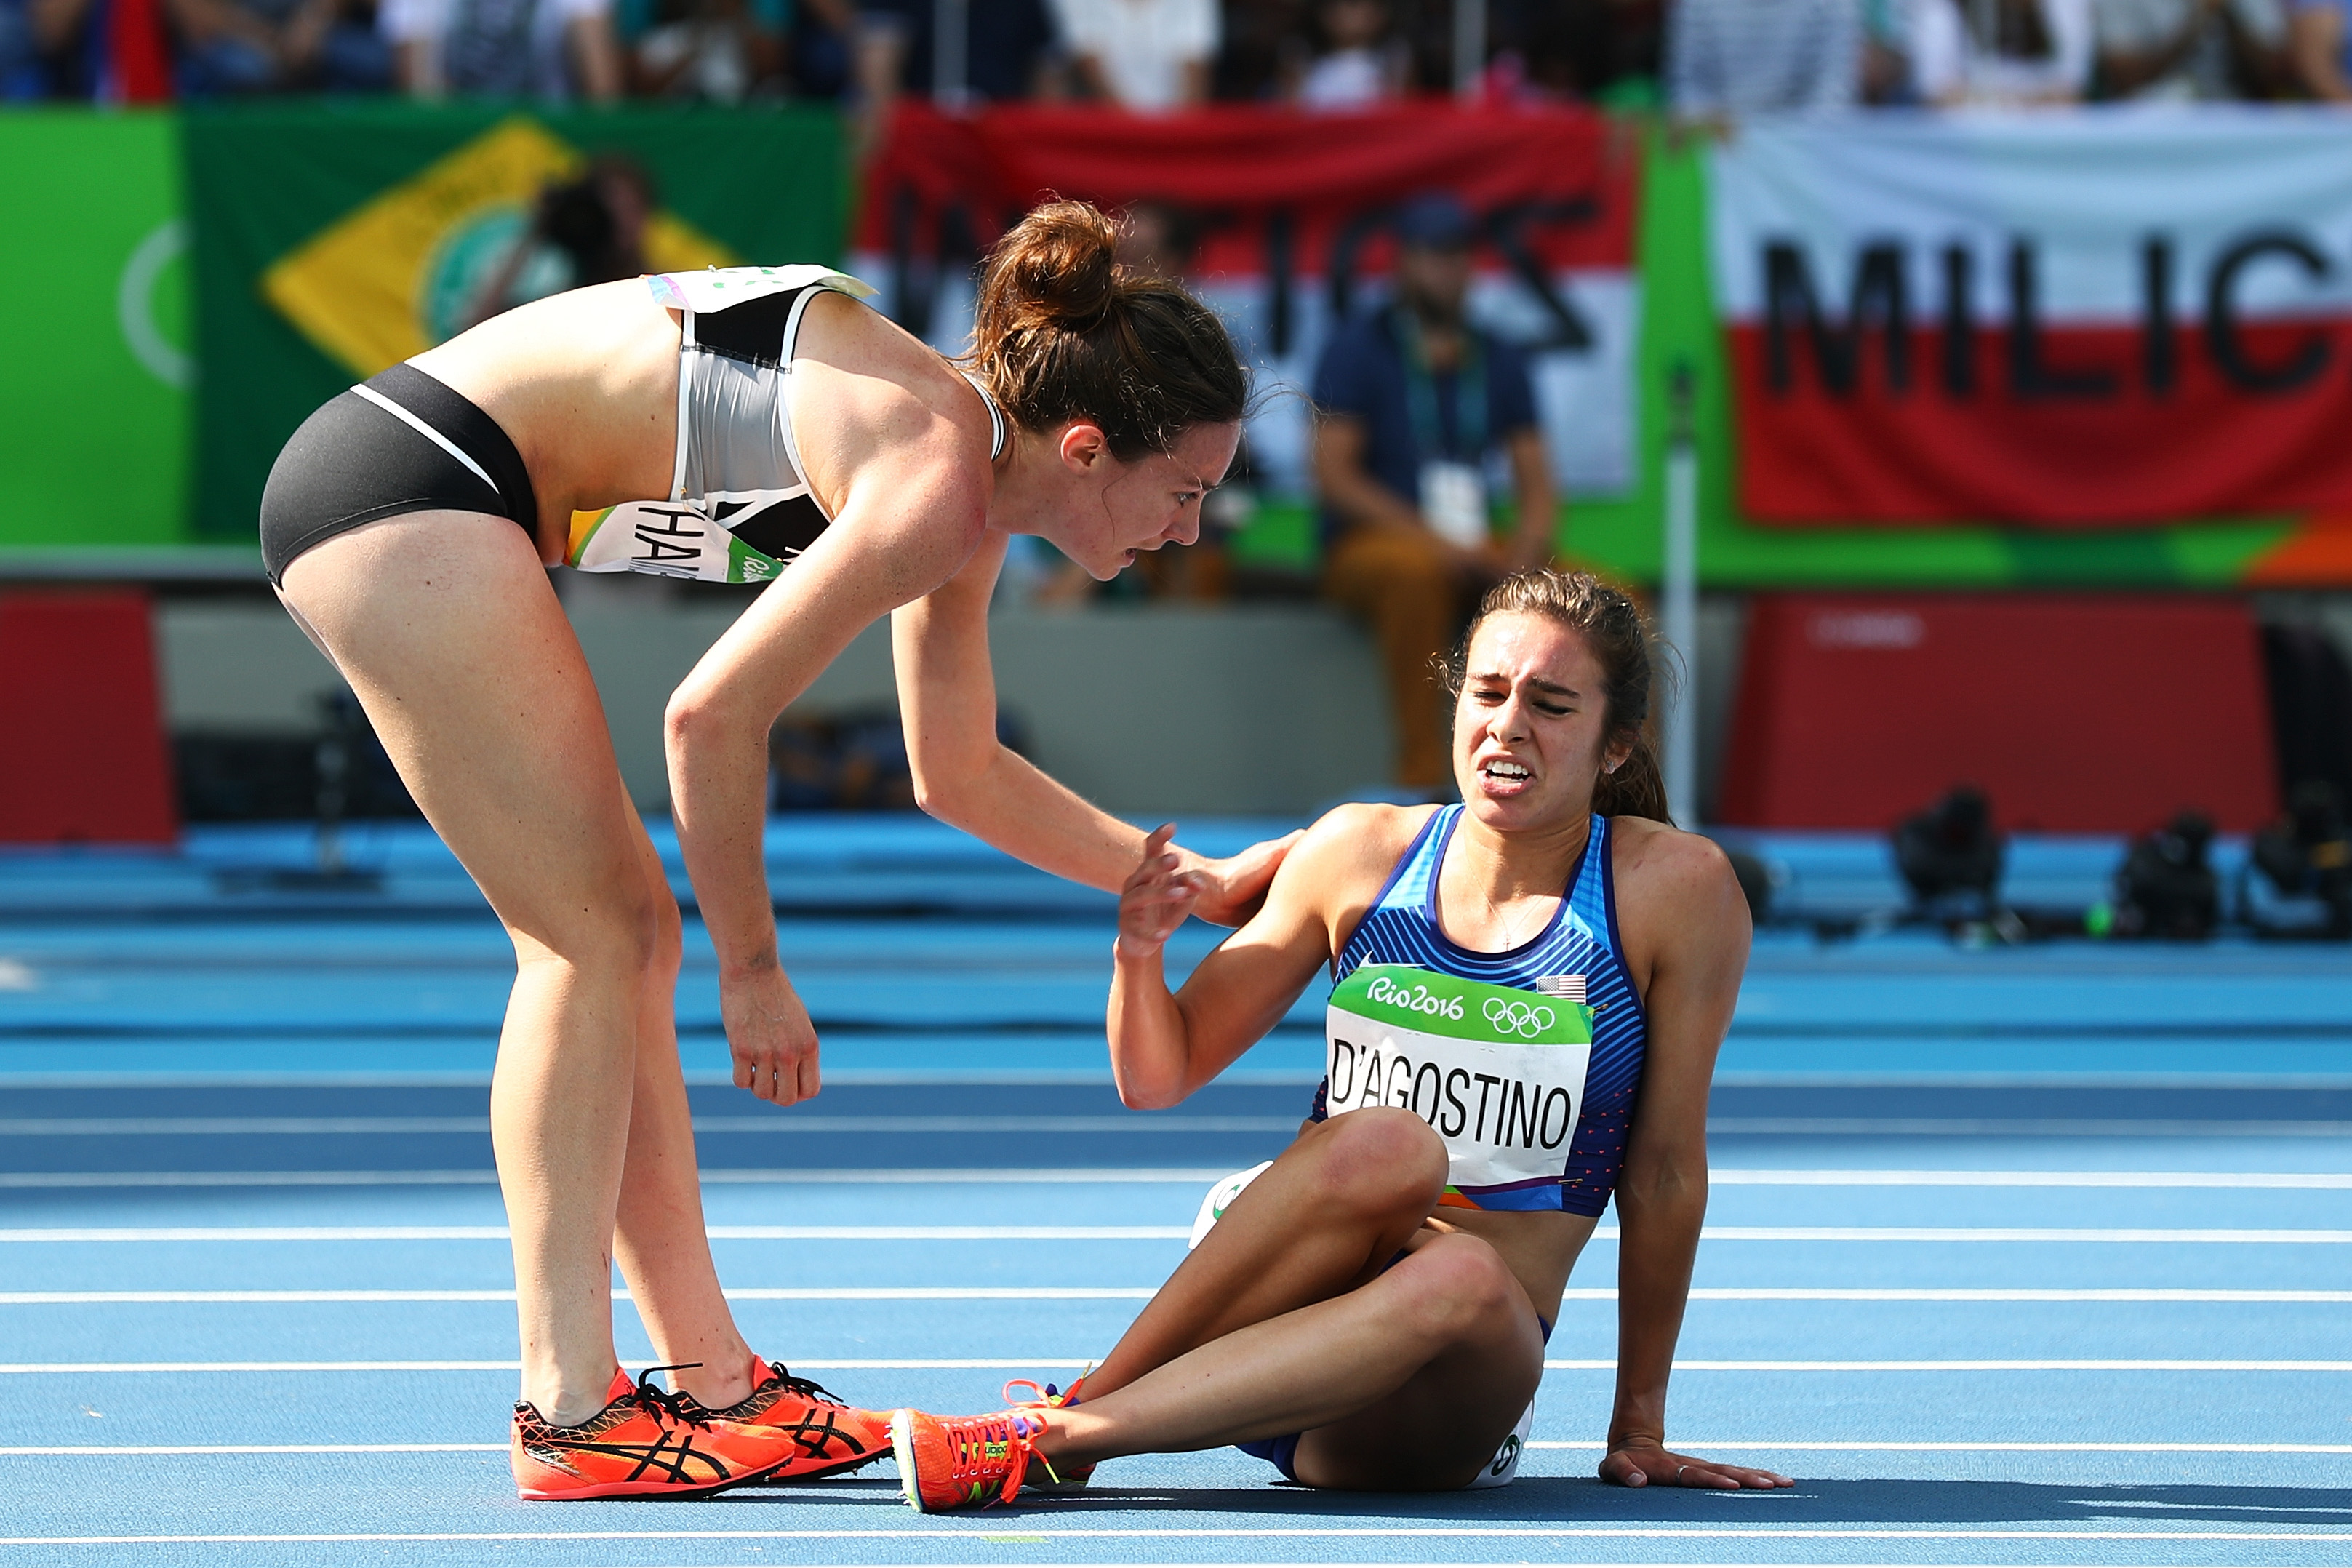 Abbey D'Agostino of the United States (R) is assisted by Nikki Hamblin of New Zealand after a collision during the Women's 5000m Round 1 - Heat 2 on Day 11 of the Rio 2016 Olympic Games at the Olympic Stadium on August 16, 2016 in Rio de Janeiro, Brazil. (Ian Walton—Getty Images)